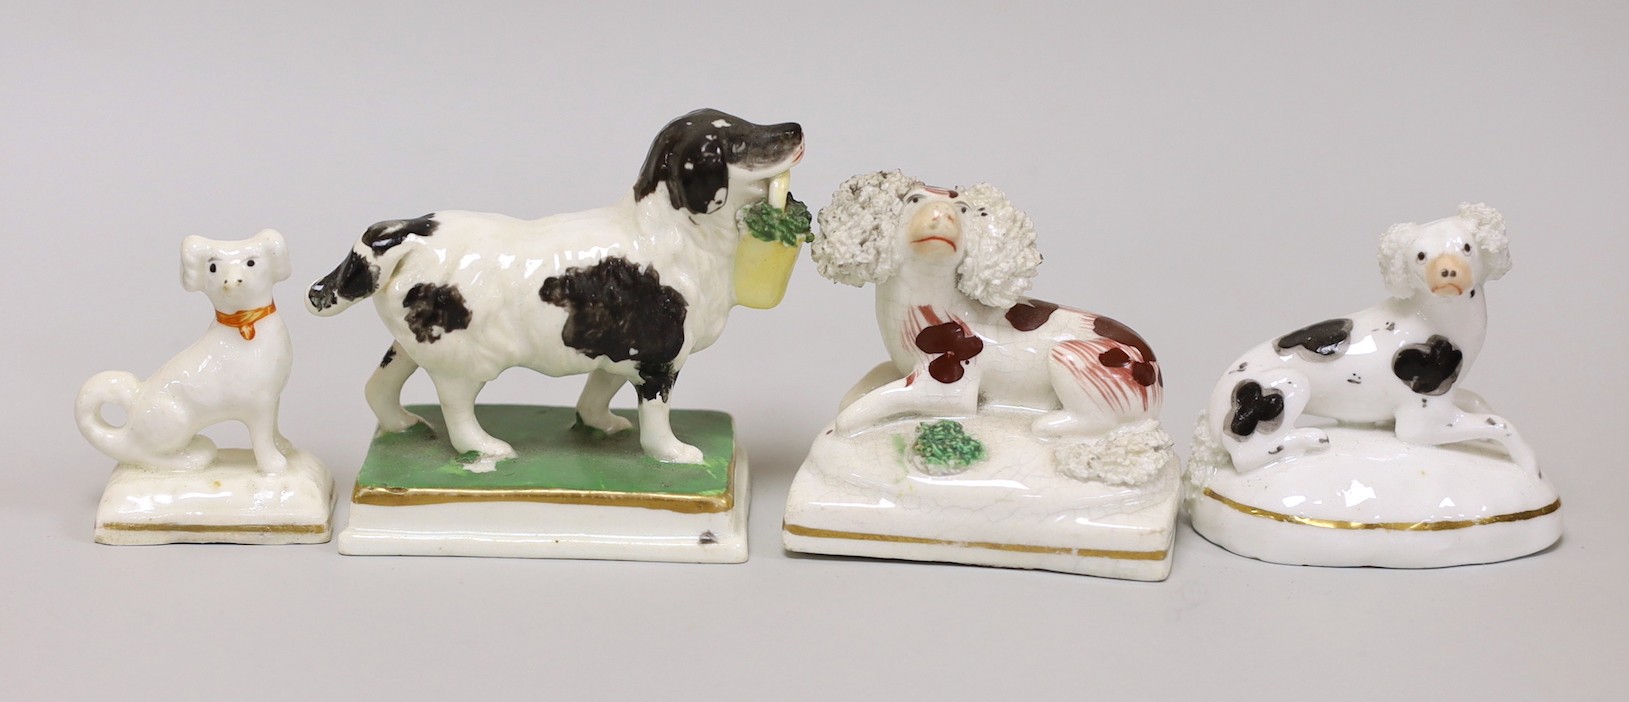 Four small Staffordshire models of spaniels; one seated on rectangular base, two lying recumbently, and the other standing on rectangular base, c.1830-50, (4), tallest 6cms high, Provenance Dennis G.Rice collection